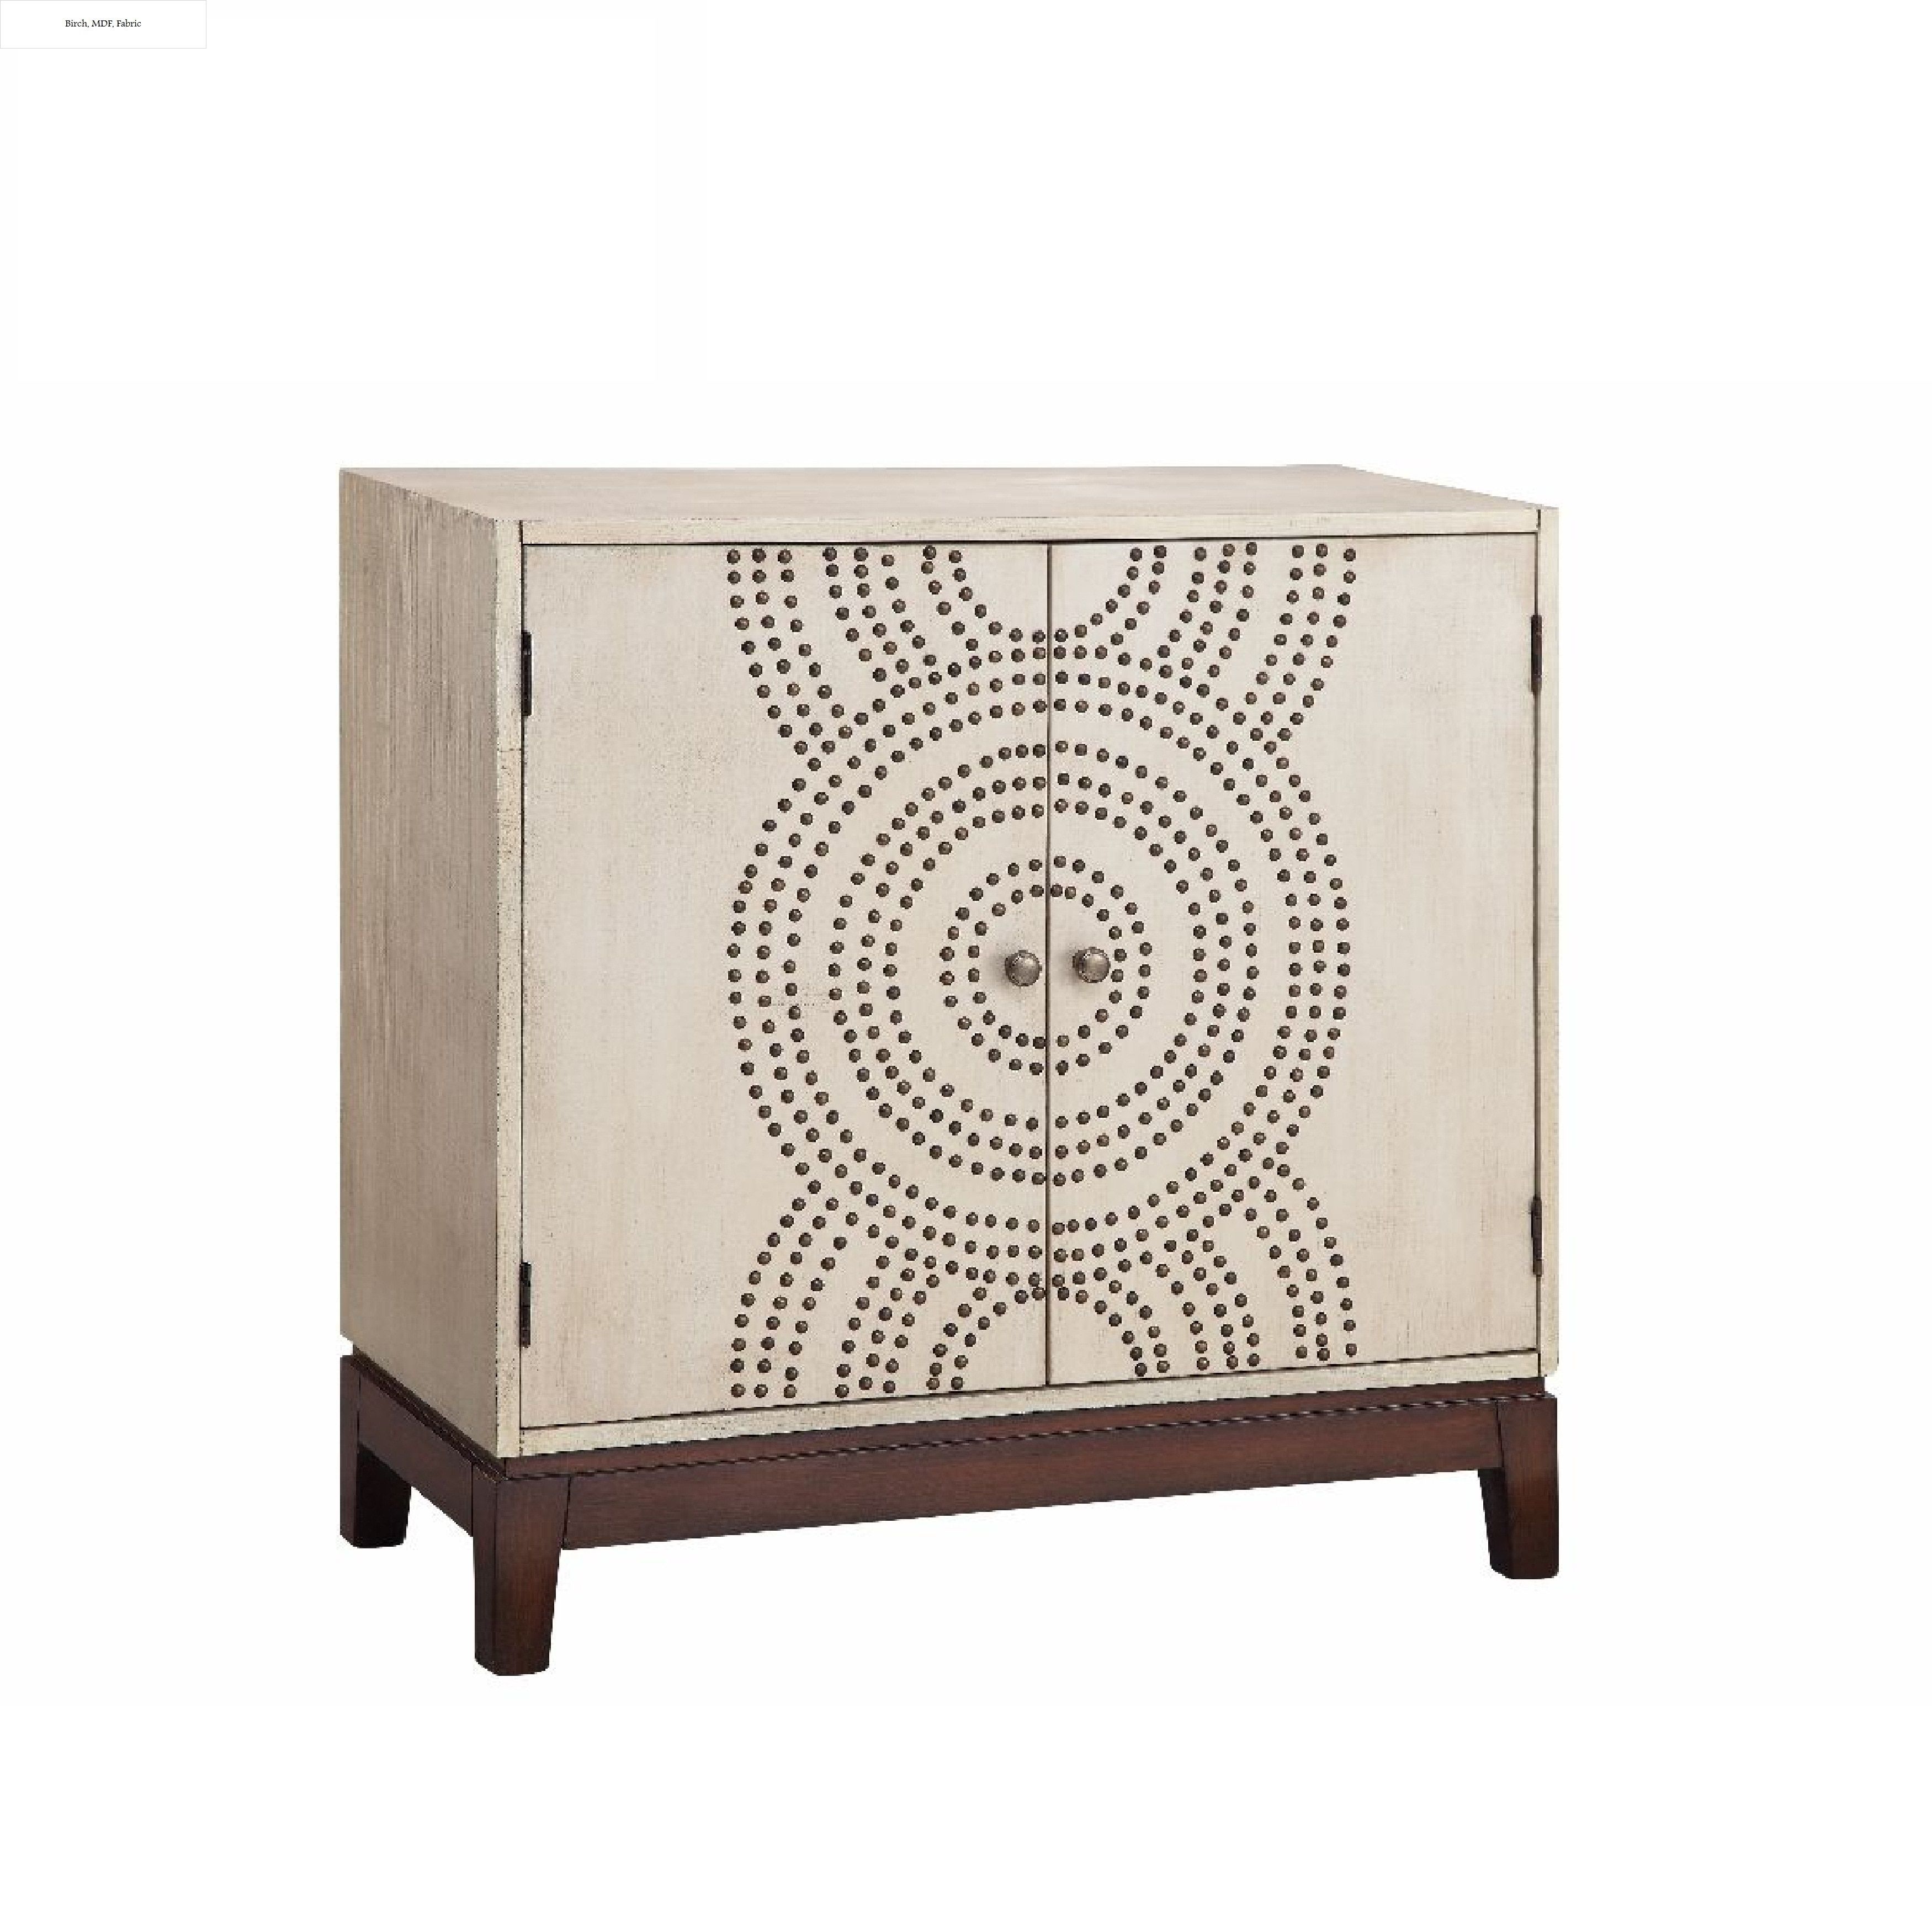 table target and winning chest decorative red crystal white gold bedroom chests square rugs light cabinets for kitchen black cabinet bathroom small lamps throw pillows accent